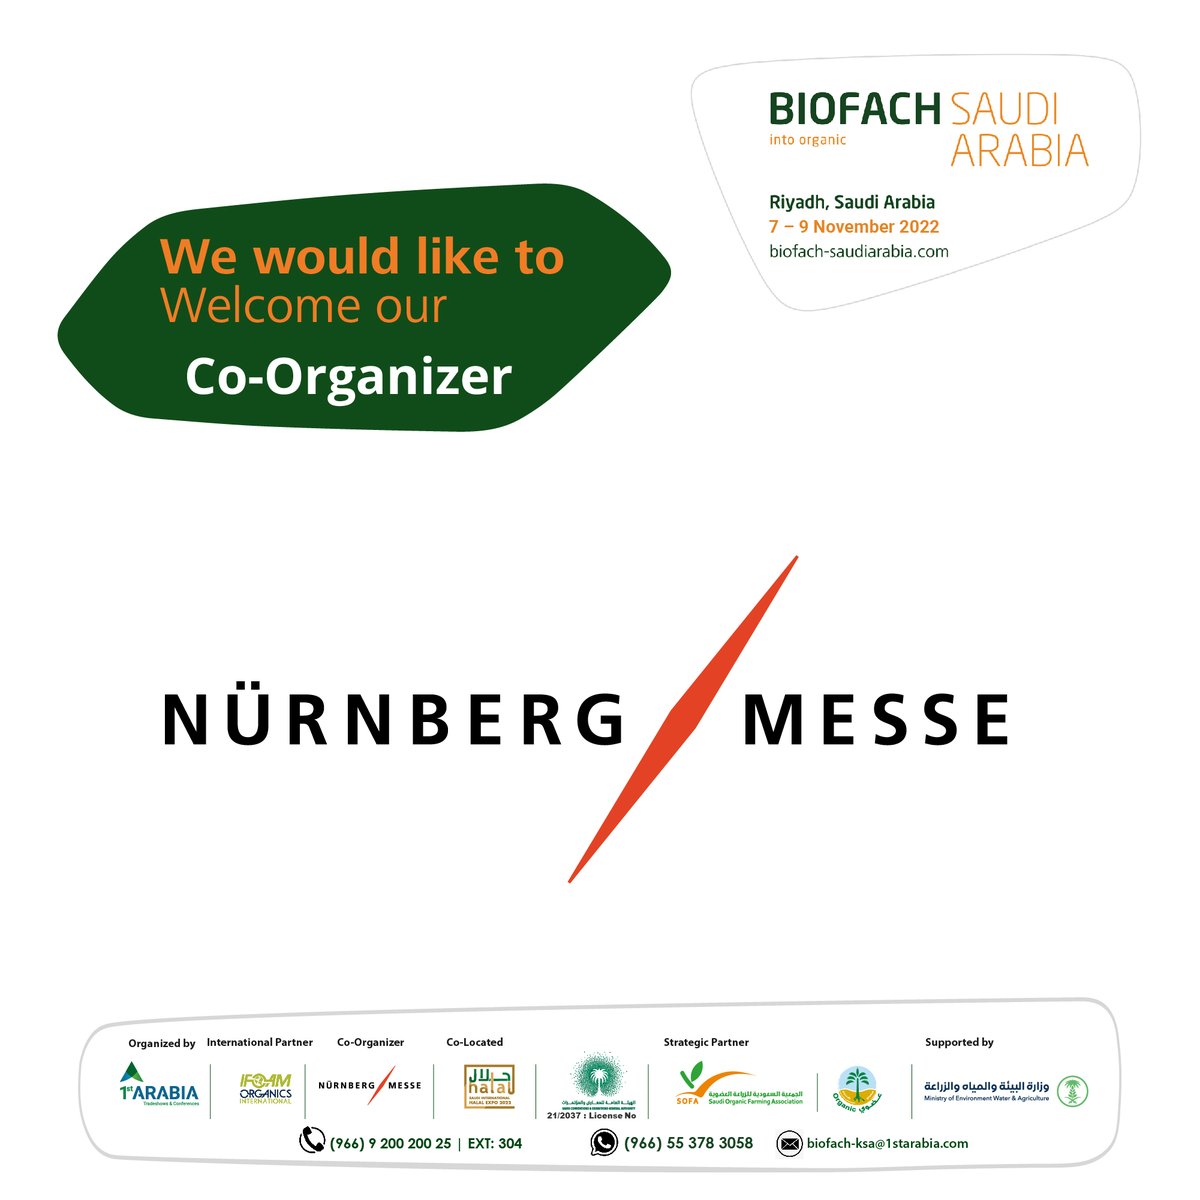 We are proud to welcome BIOFACH Saudi Arabia Co-Organizer @nurnbergmesse one of the 15 largest exhibition companies in the world!
 #1starabia #BiofachSaudiArabia #nürnbergmessegroup #biofach